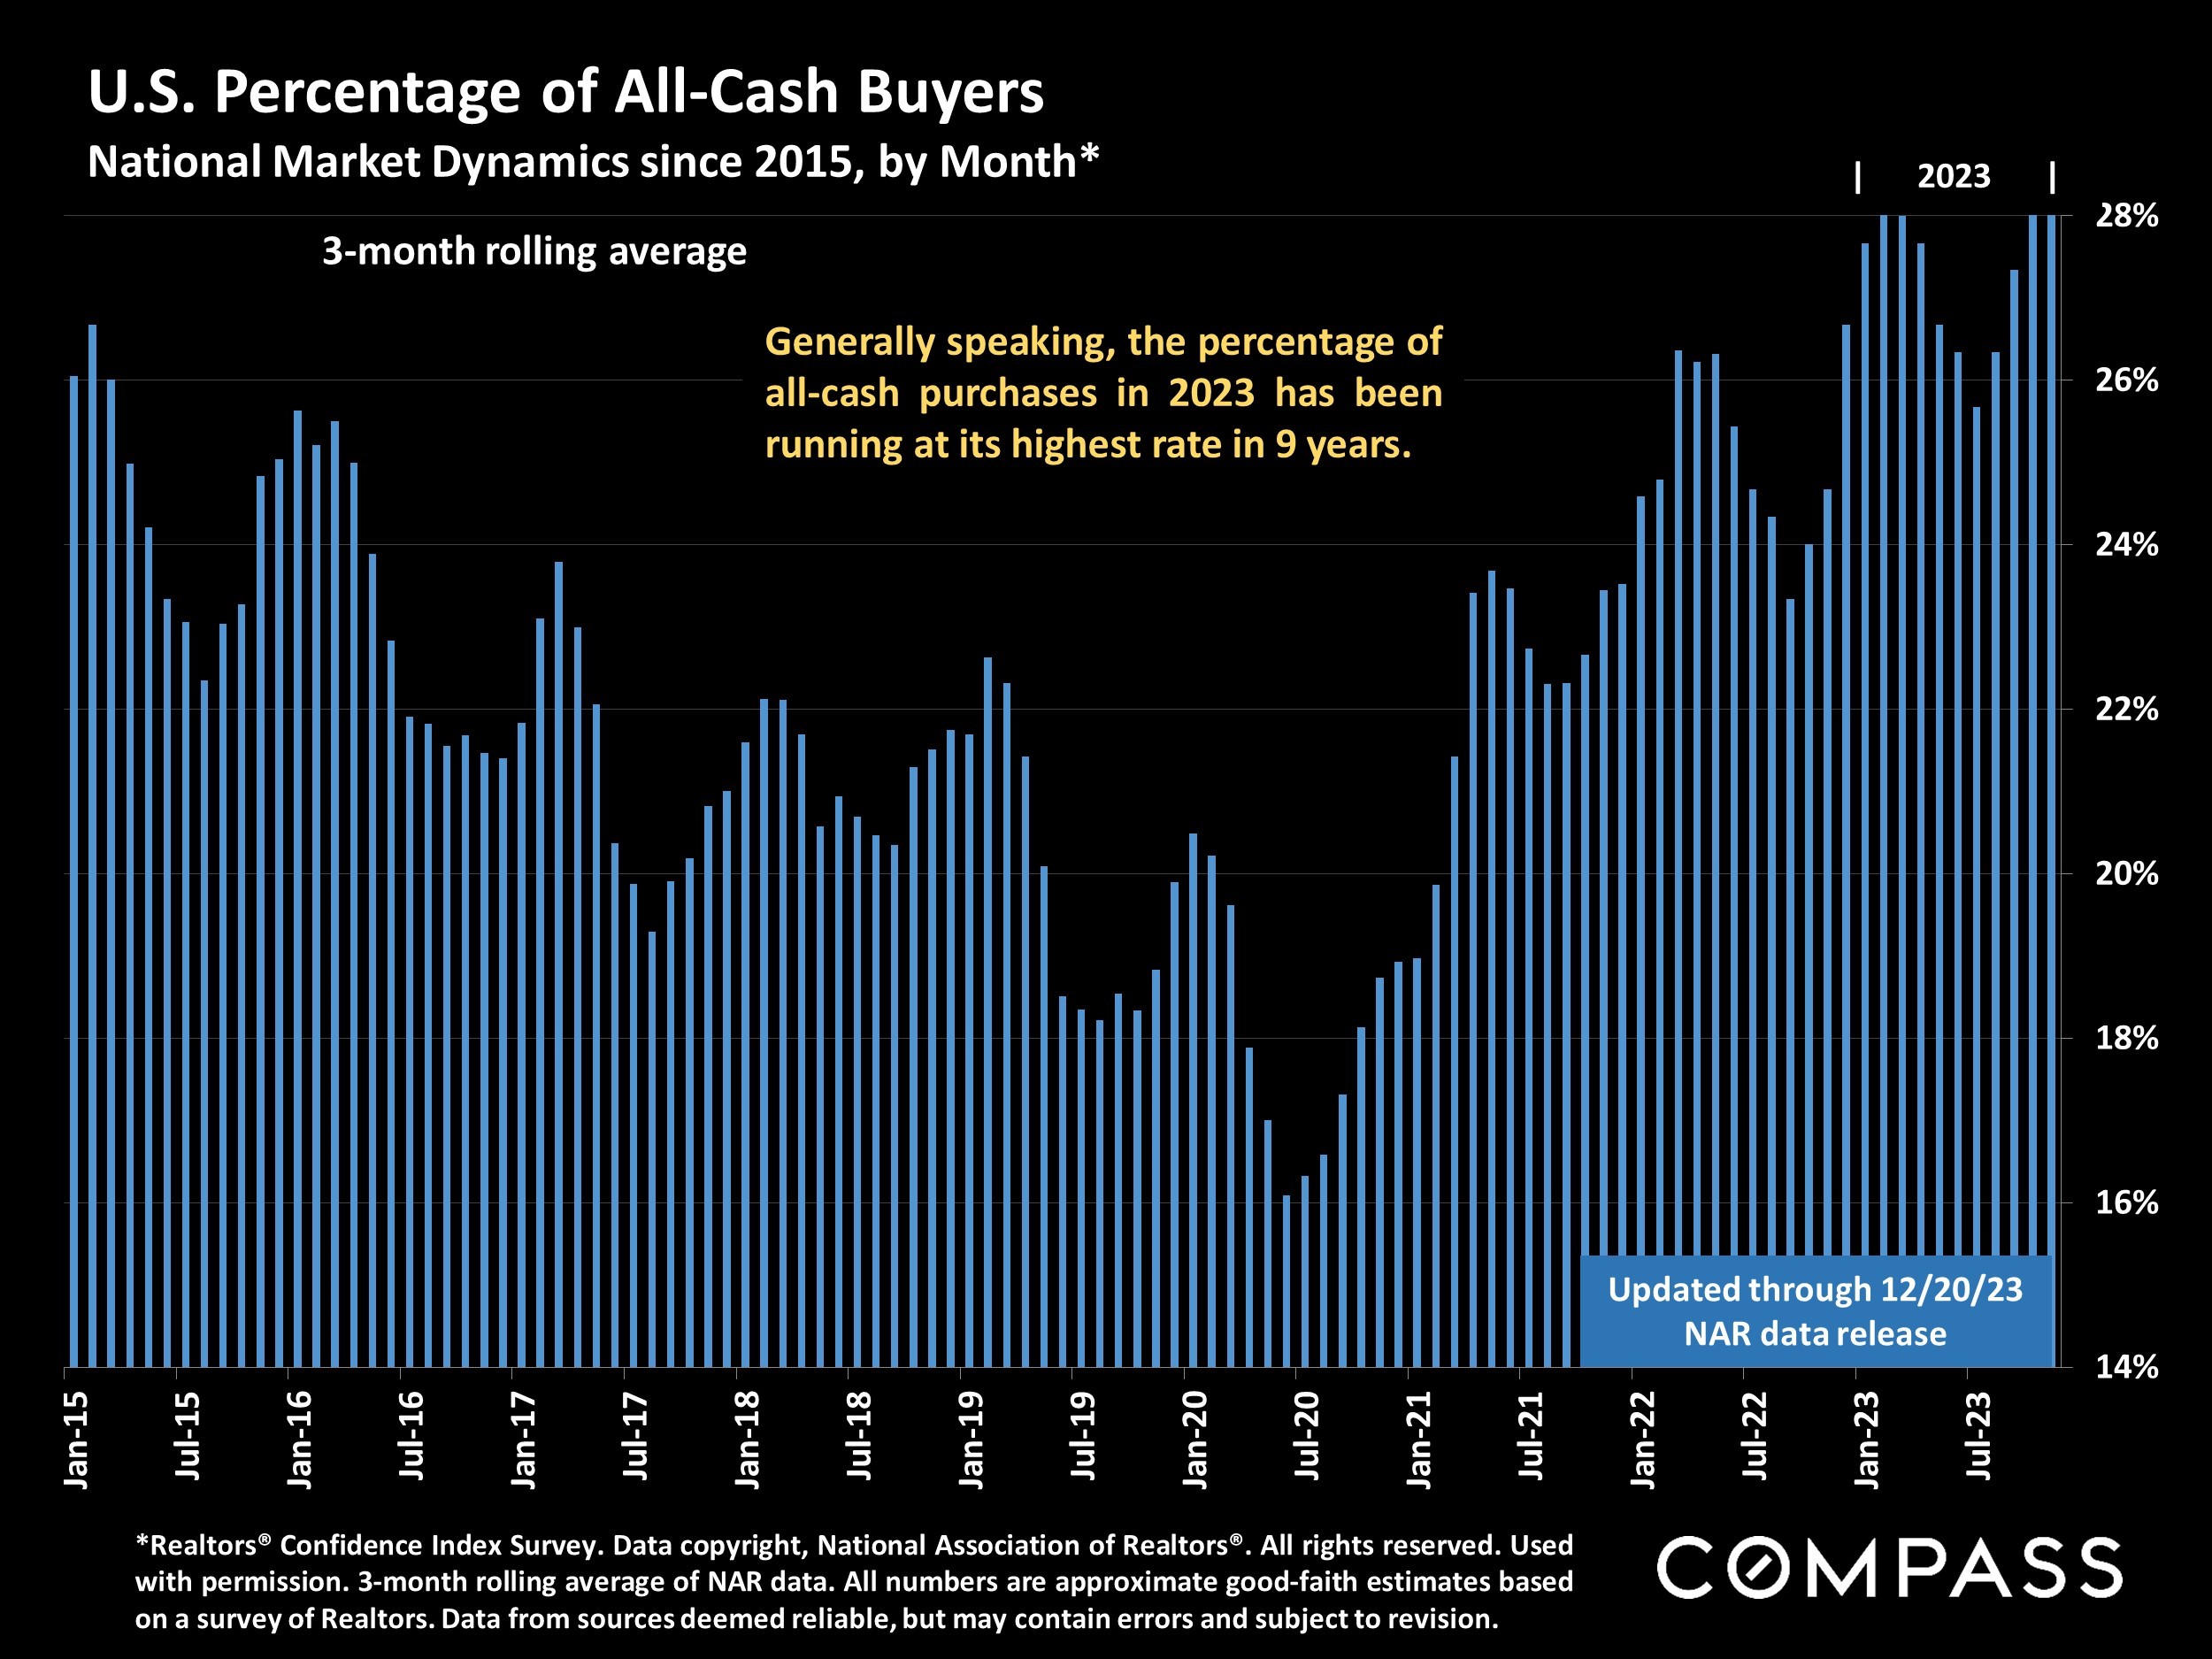 U.S. Percentage of All-Cash Buyers National Market Dynamics since 2015, by Month*